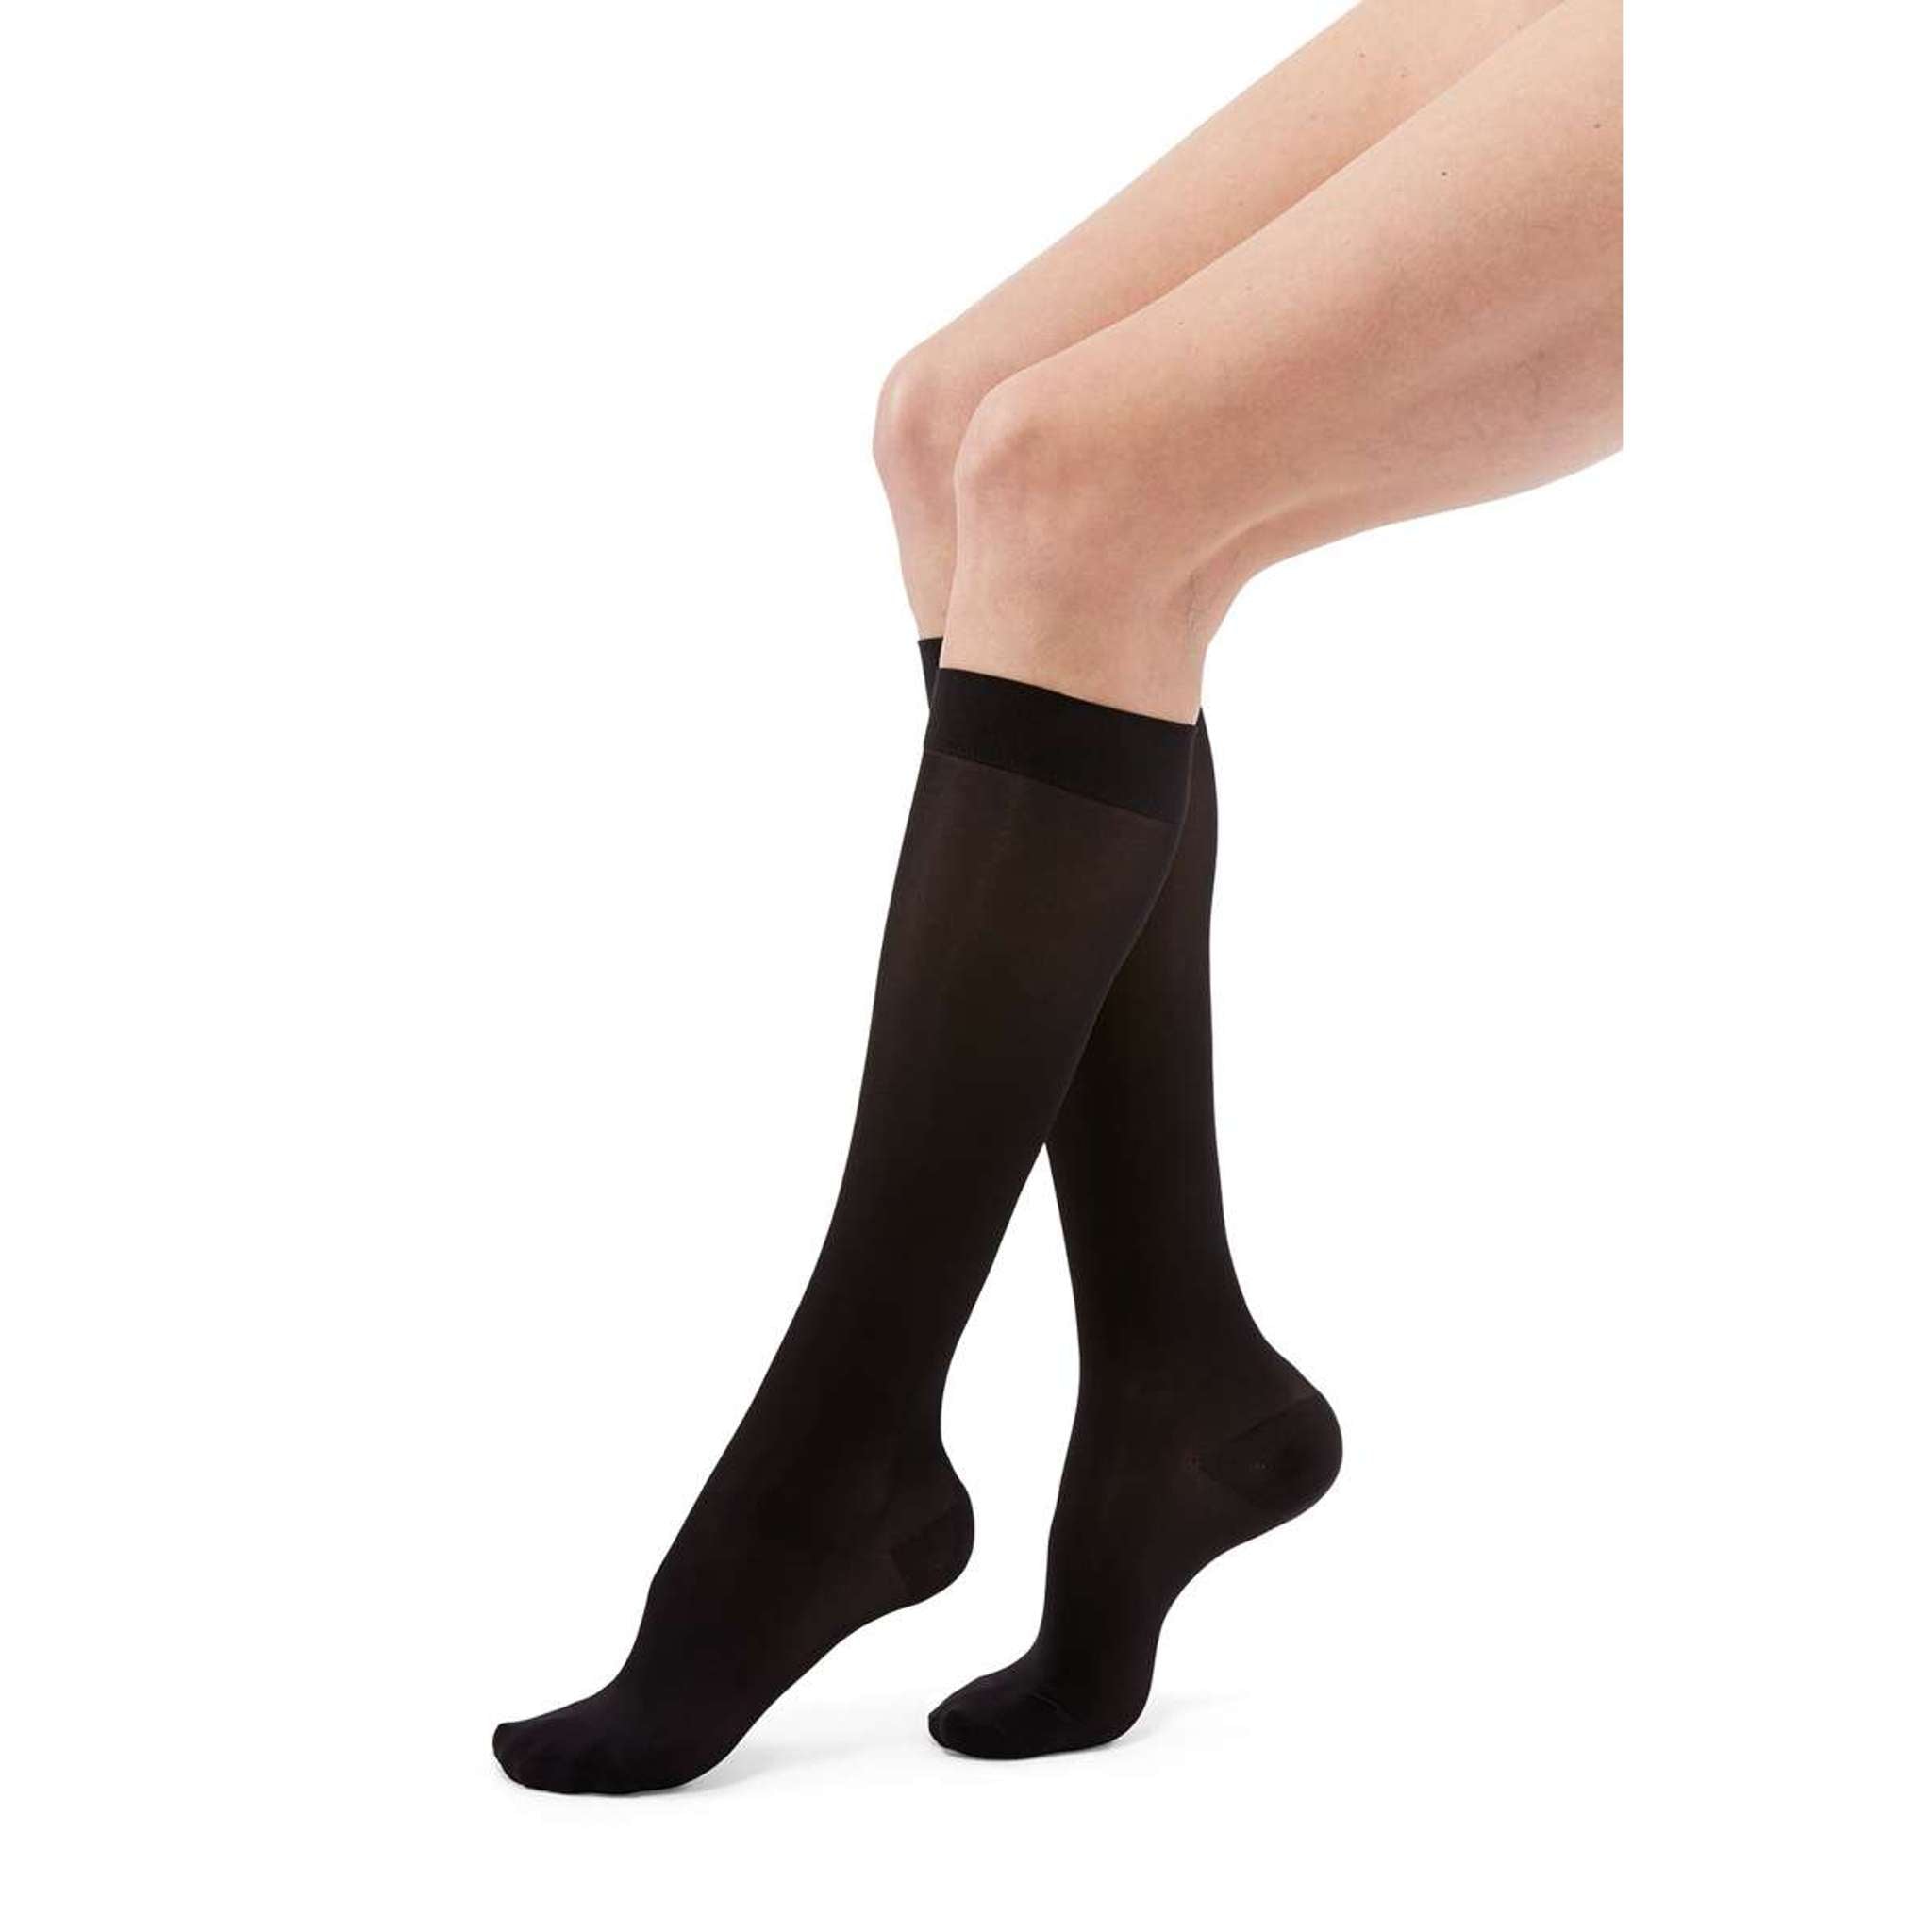 duomed transparent 15-20 mmHg Calf High Closed Toe Compression Stockings